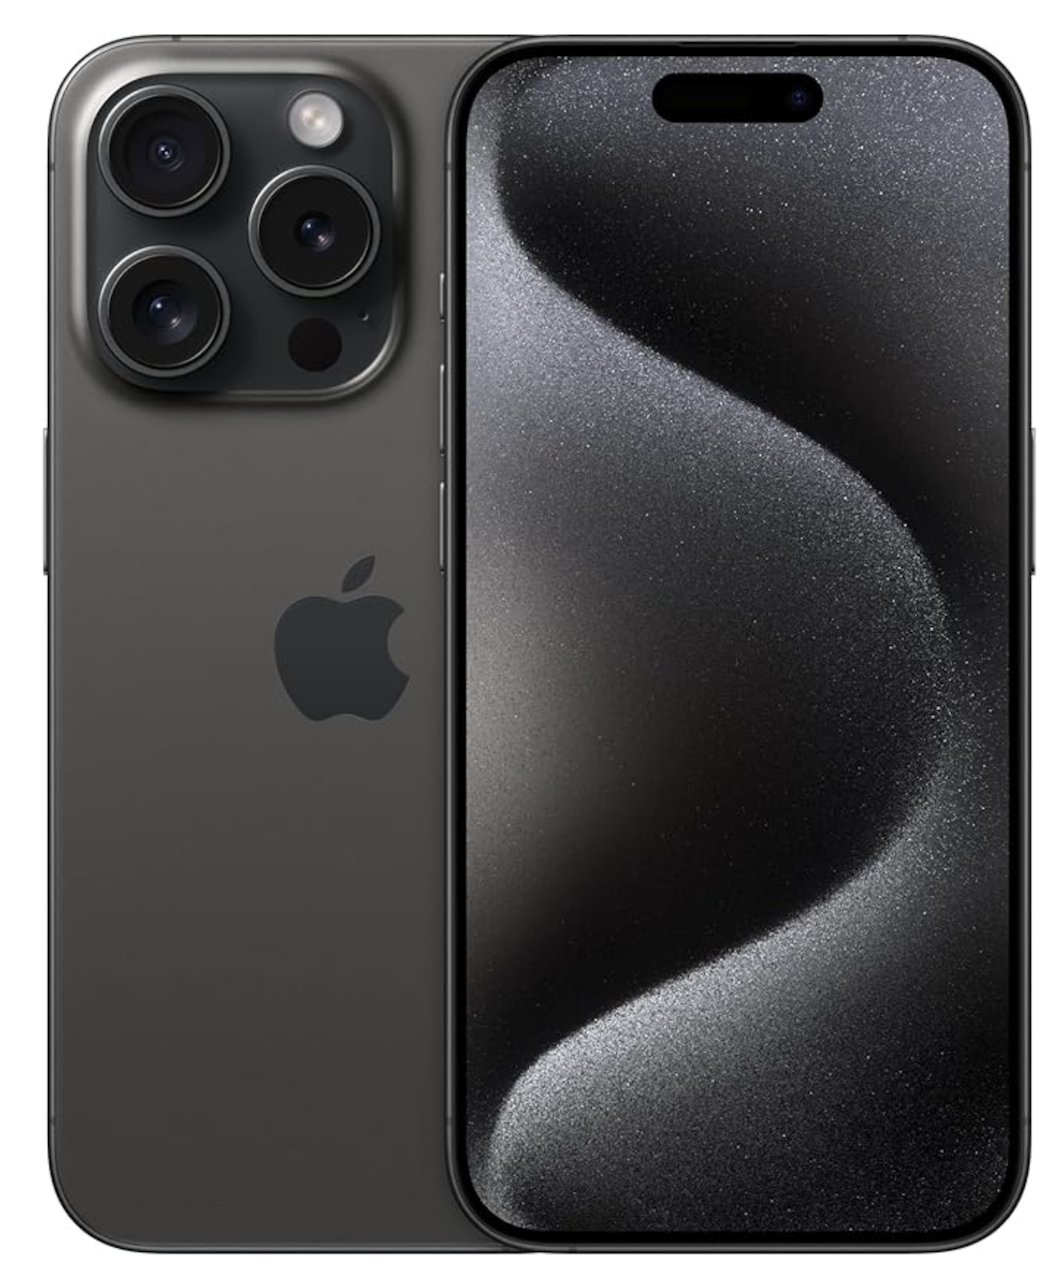 iPhone 15 Pro - Is Another Camera Segment Now in Danger?, film